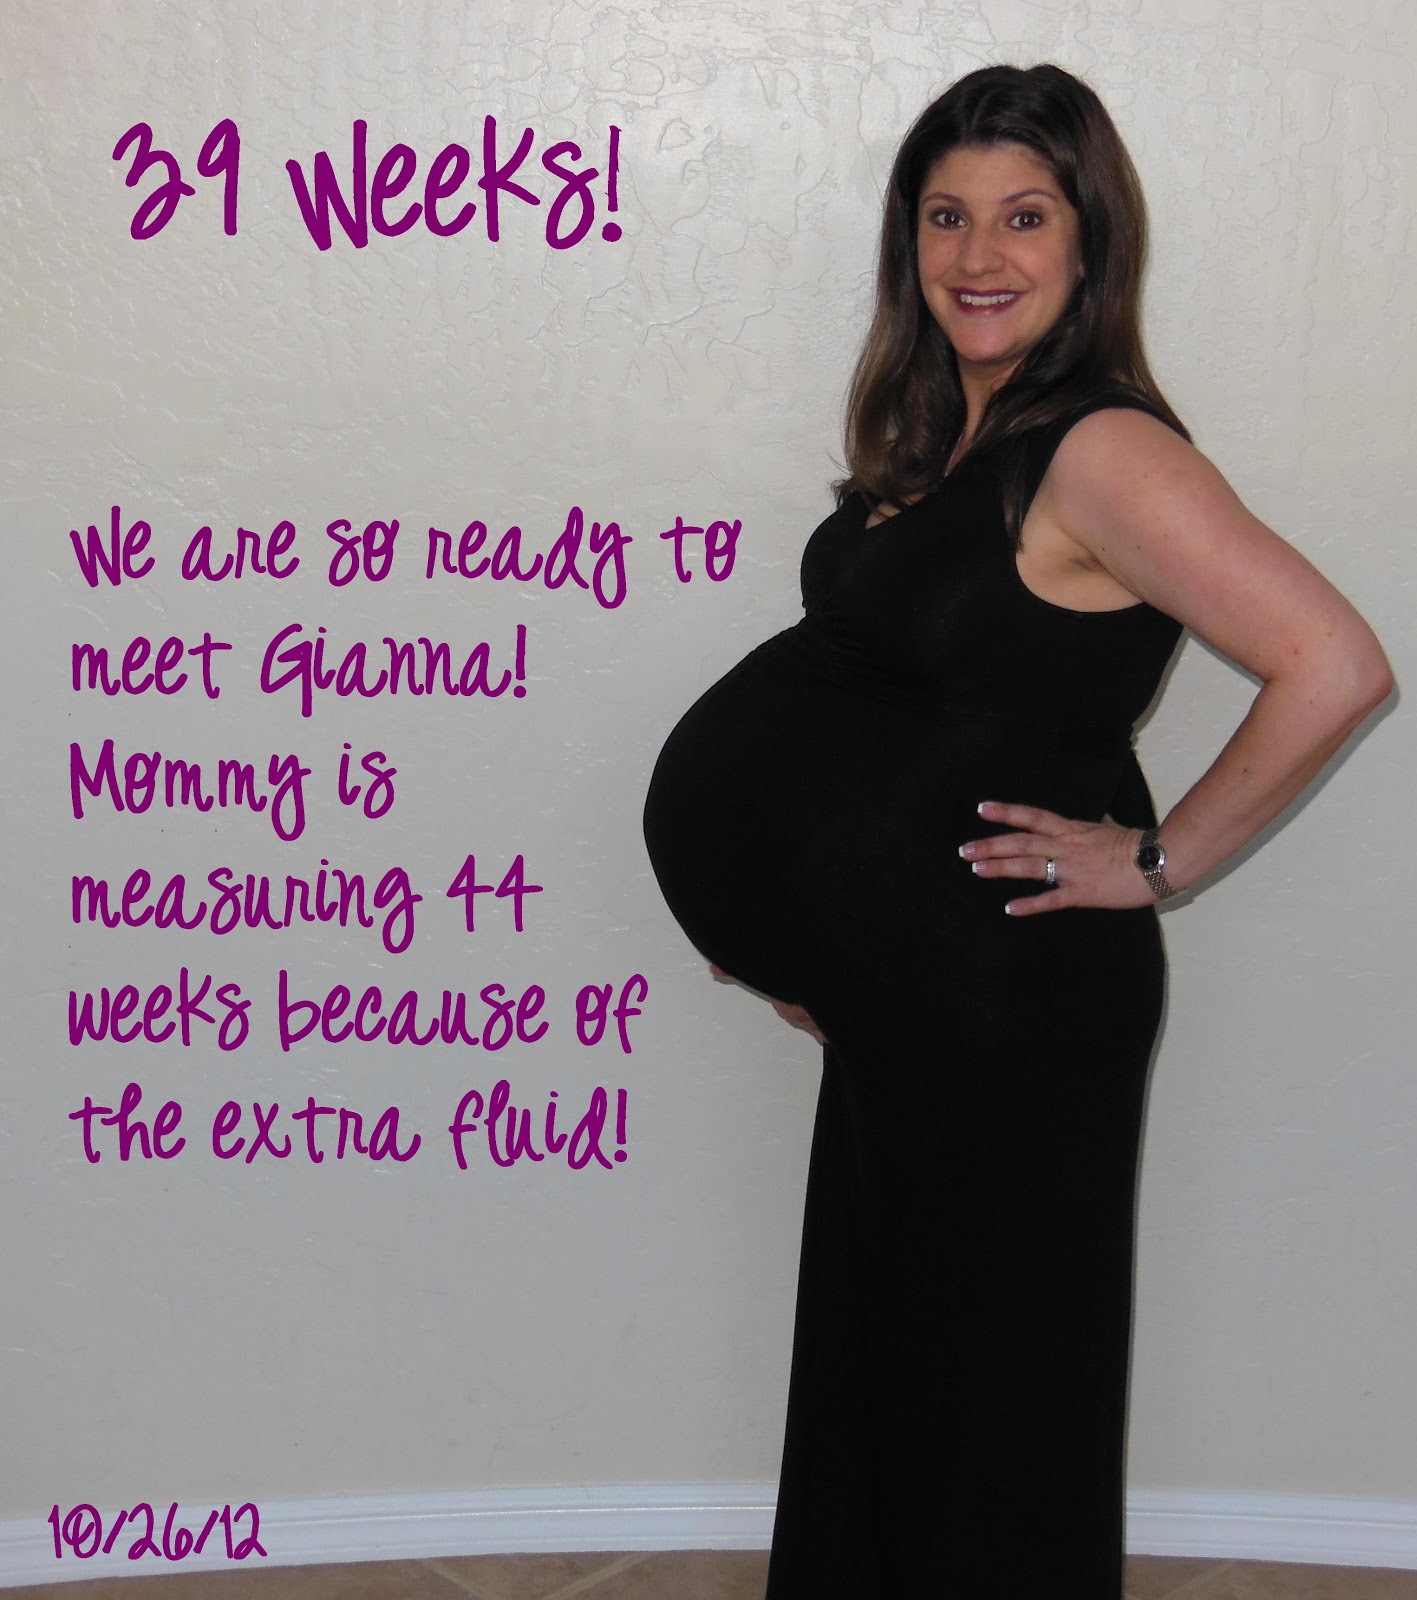 The Angioni Family 39 Weeks On Maternity Leave!